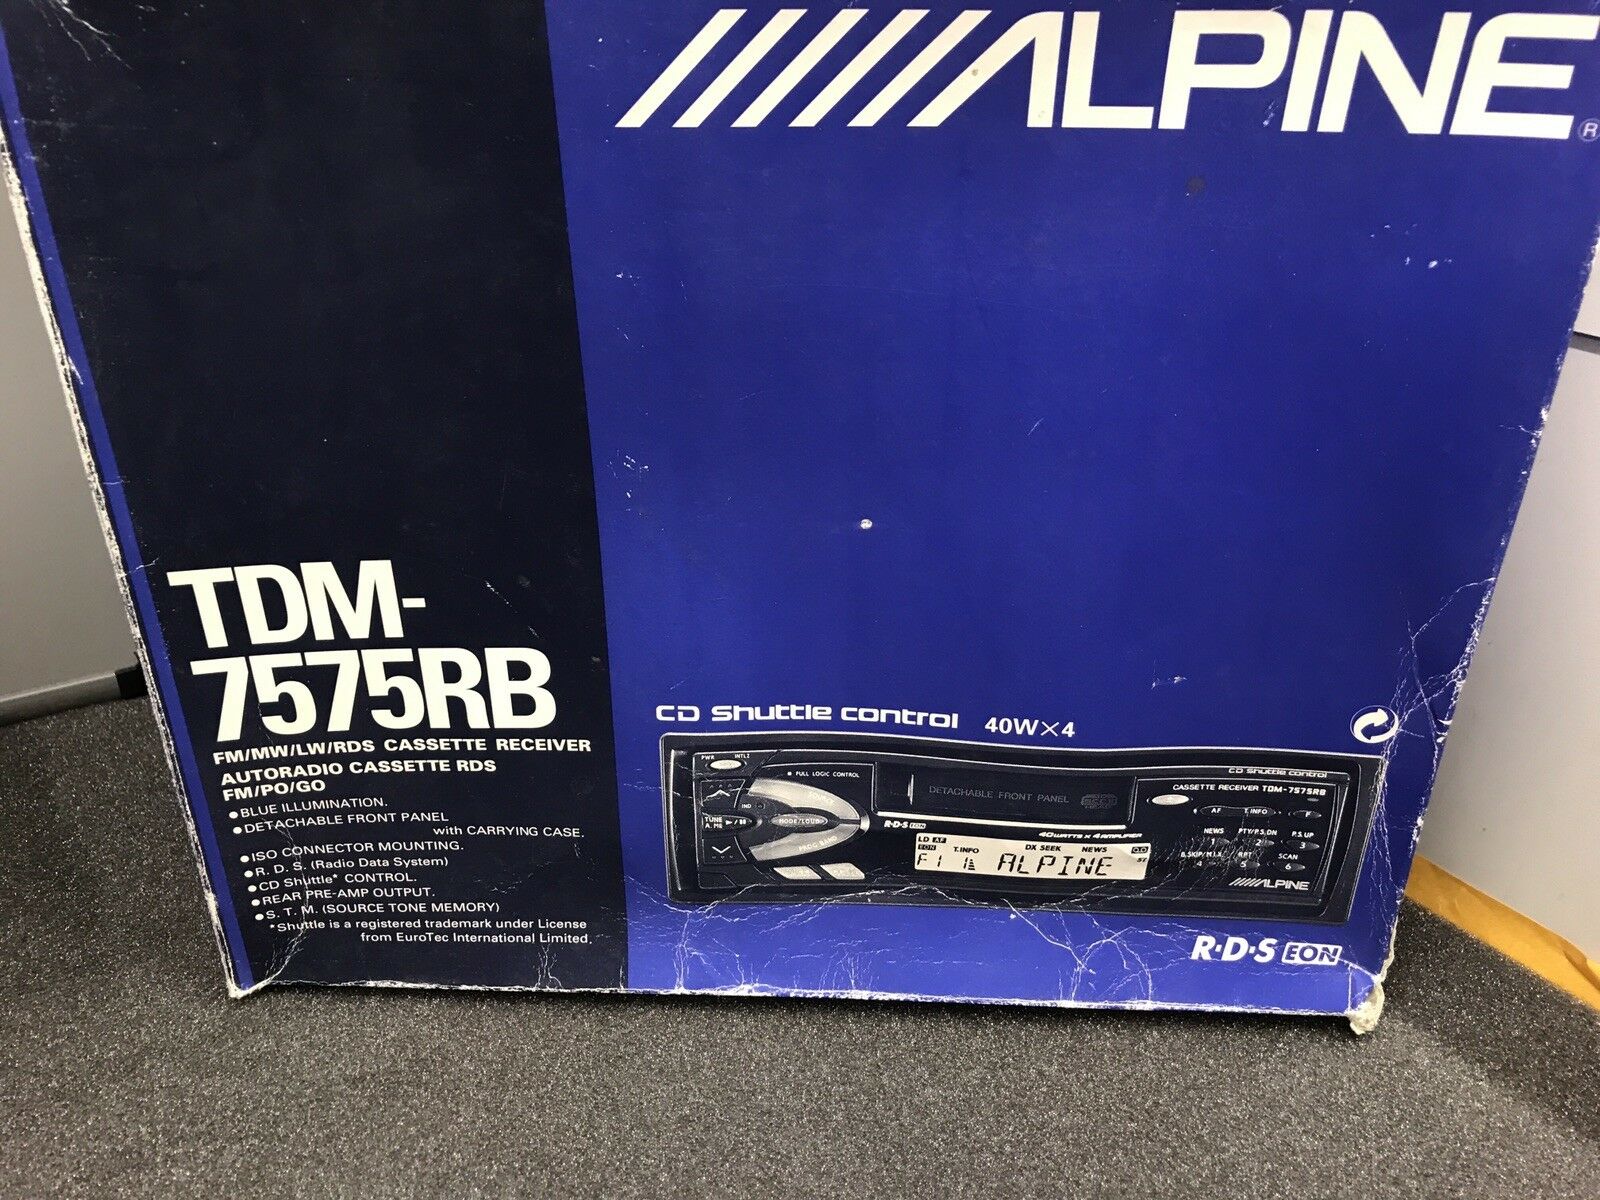 Old Classic Alpine Car Radio Cassette Player Model Tdm-7575rb With M-Bus Control